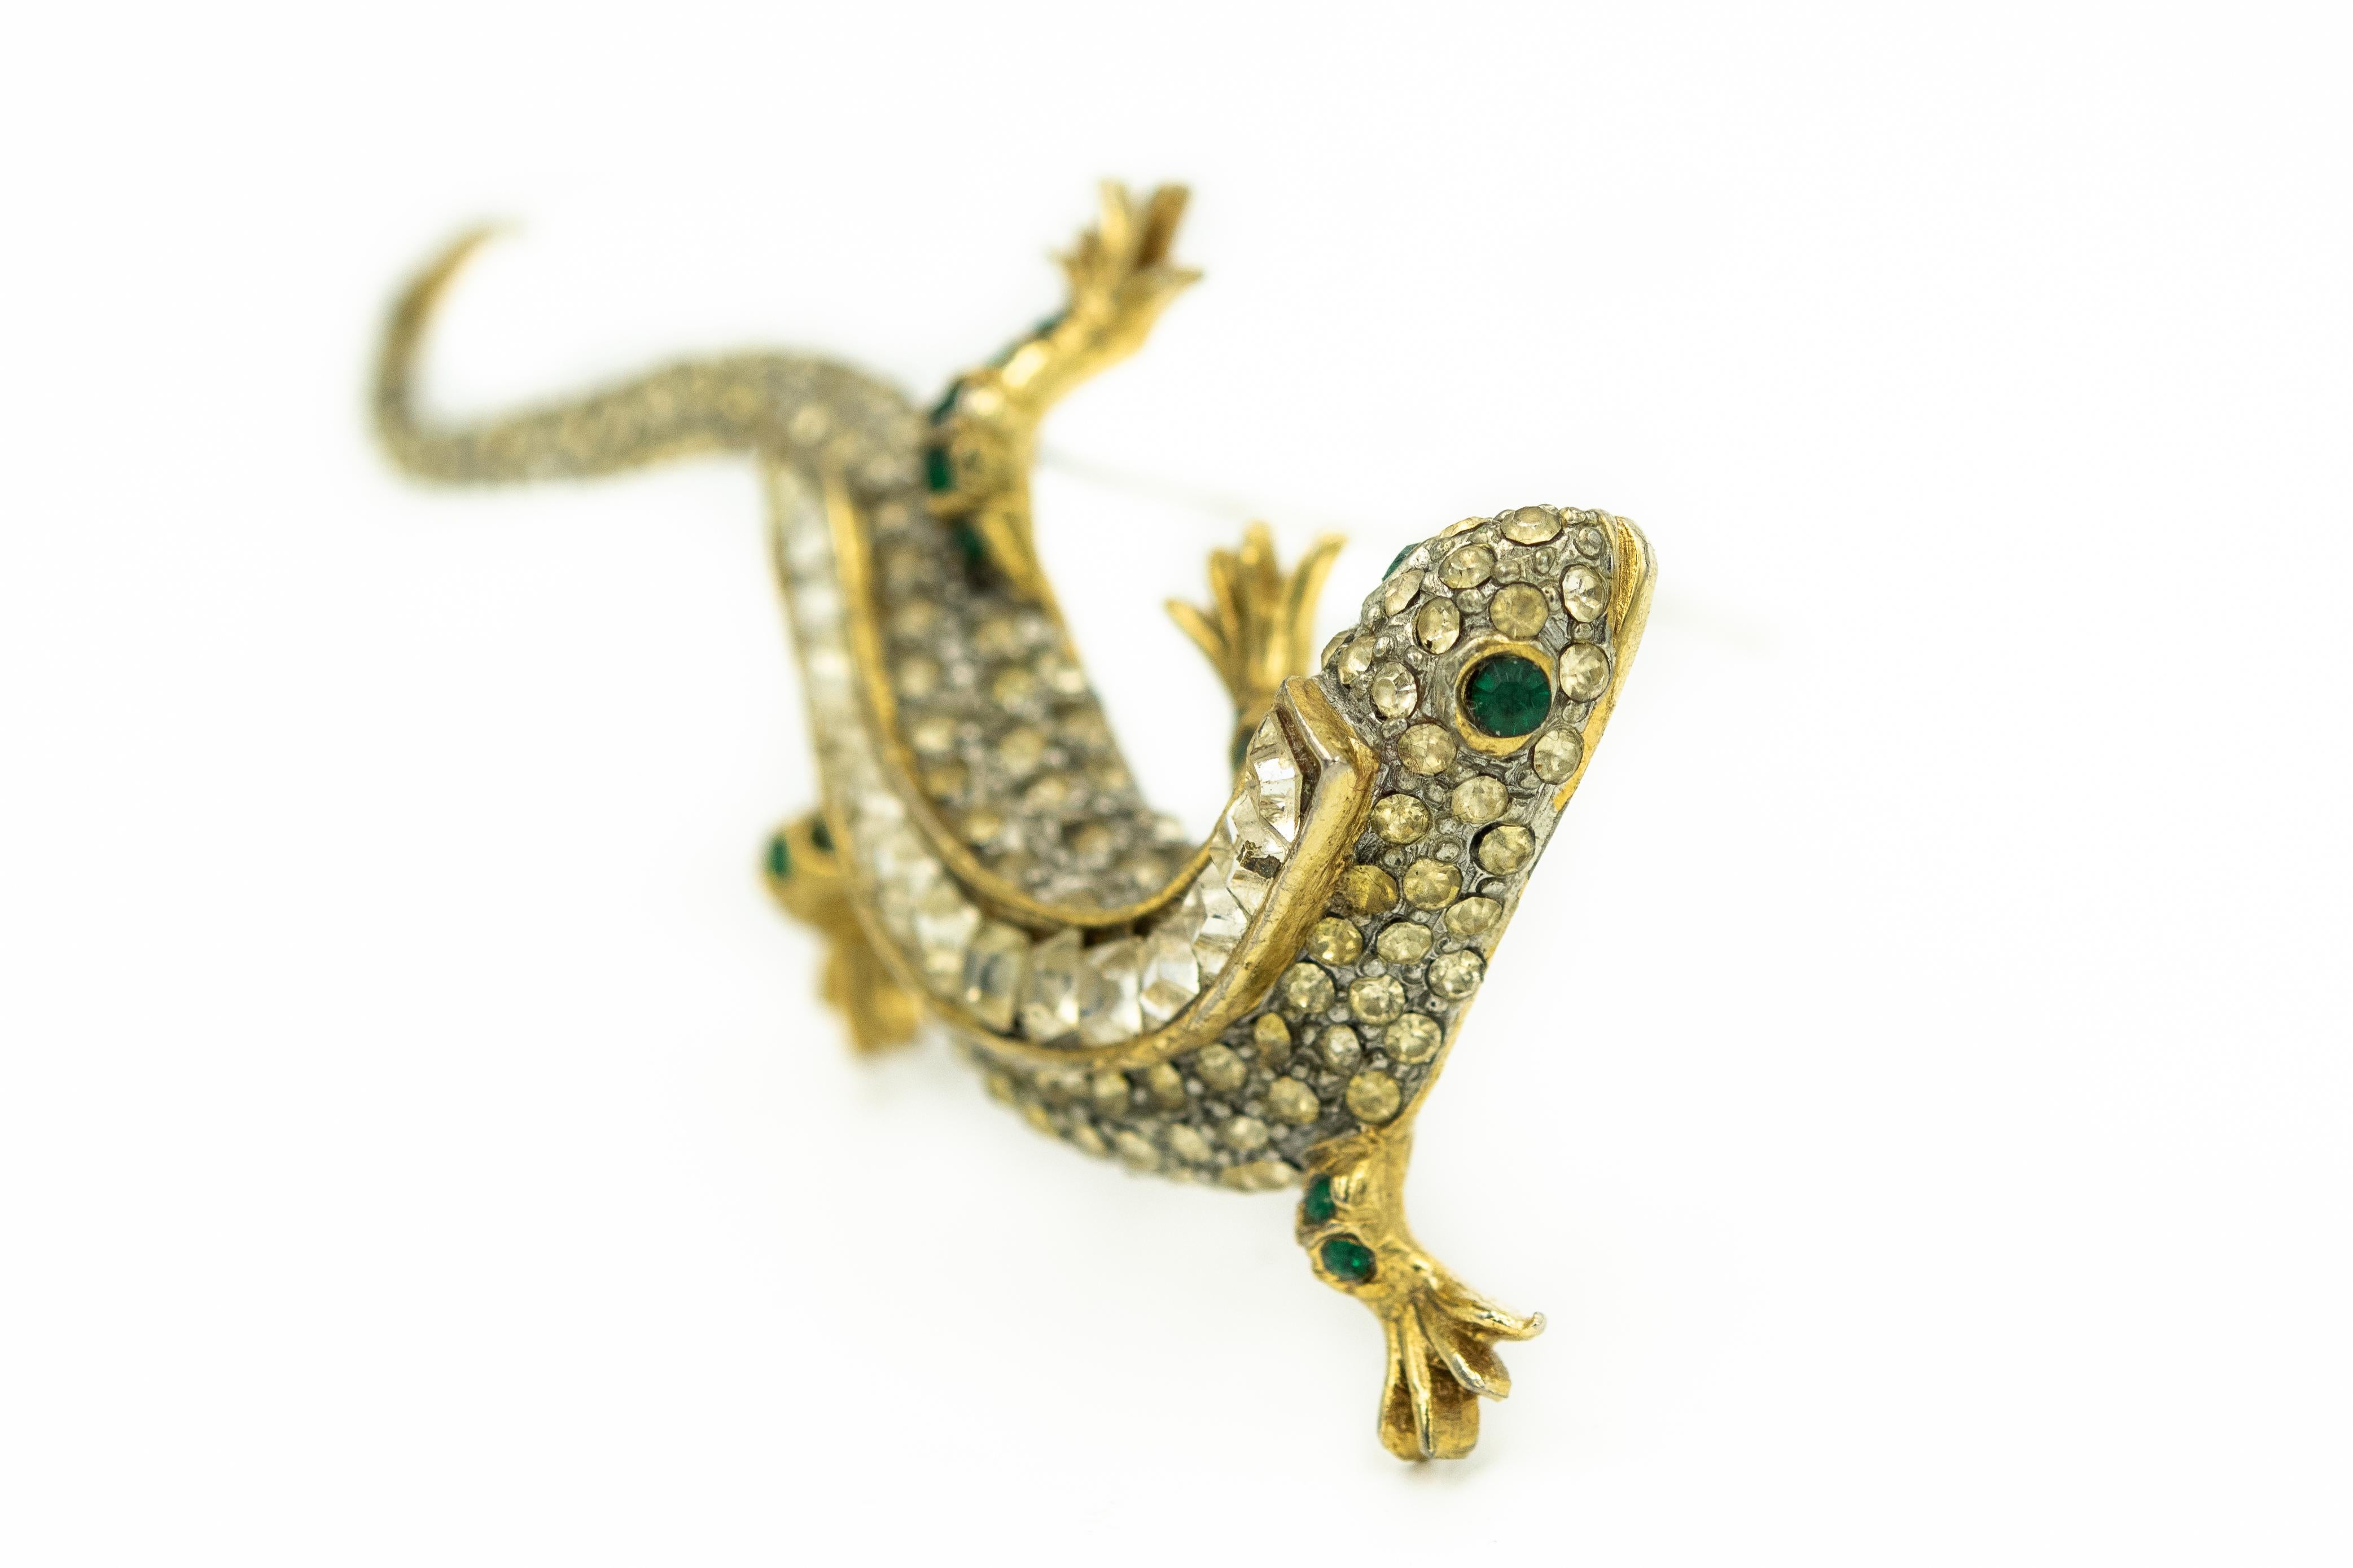 Exceptional salamander lizard gecko made by Maresco is the 1980s. He is bold, and flashy in pristine condition. The gold plated brass animal is totally encrusted with Swarovski rhinestones from his nose to the tip of his tail. He has gold plated